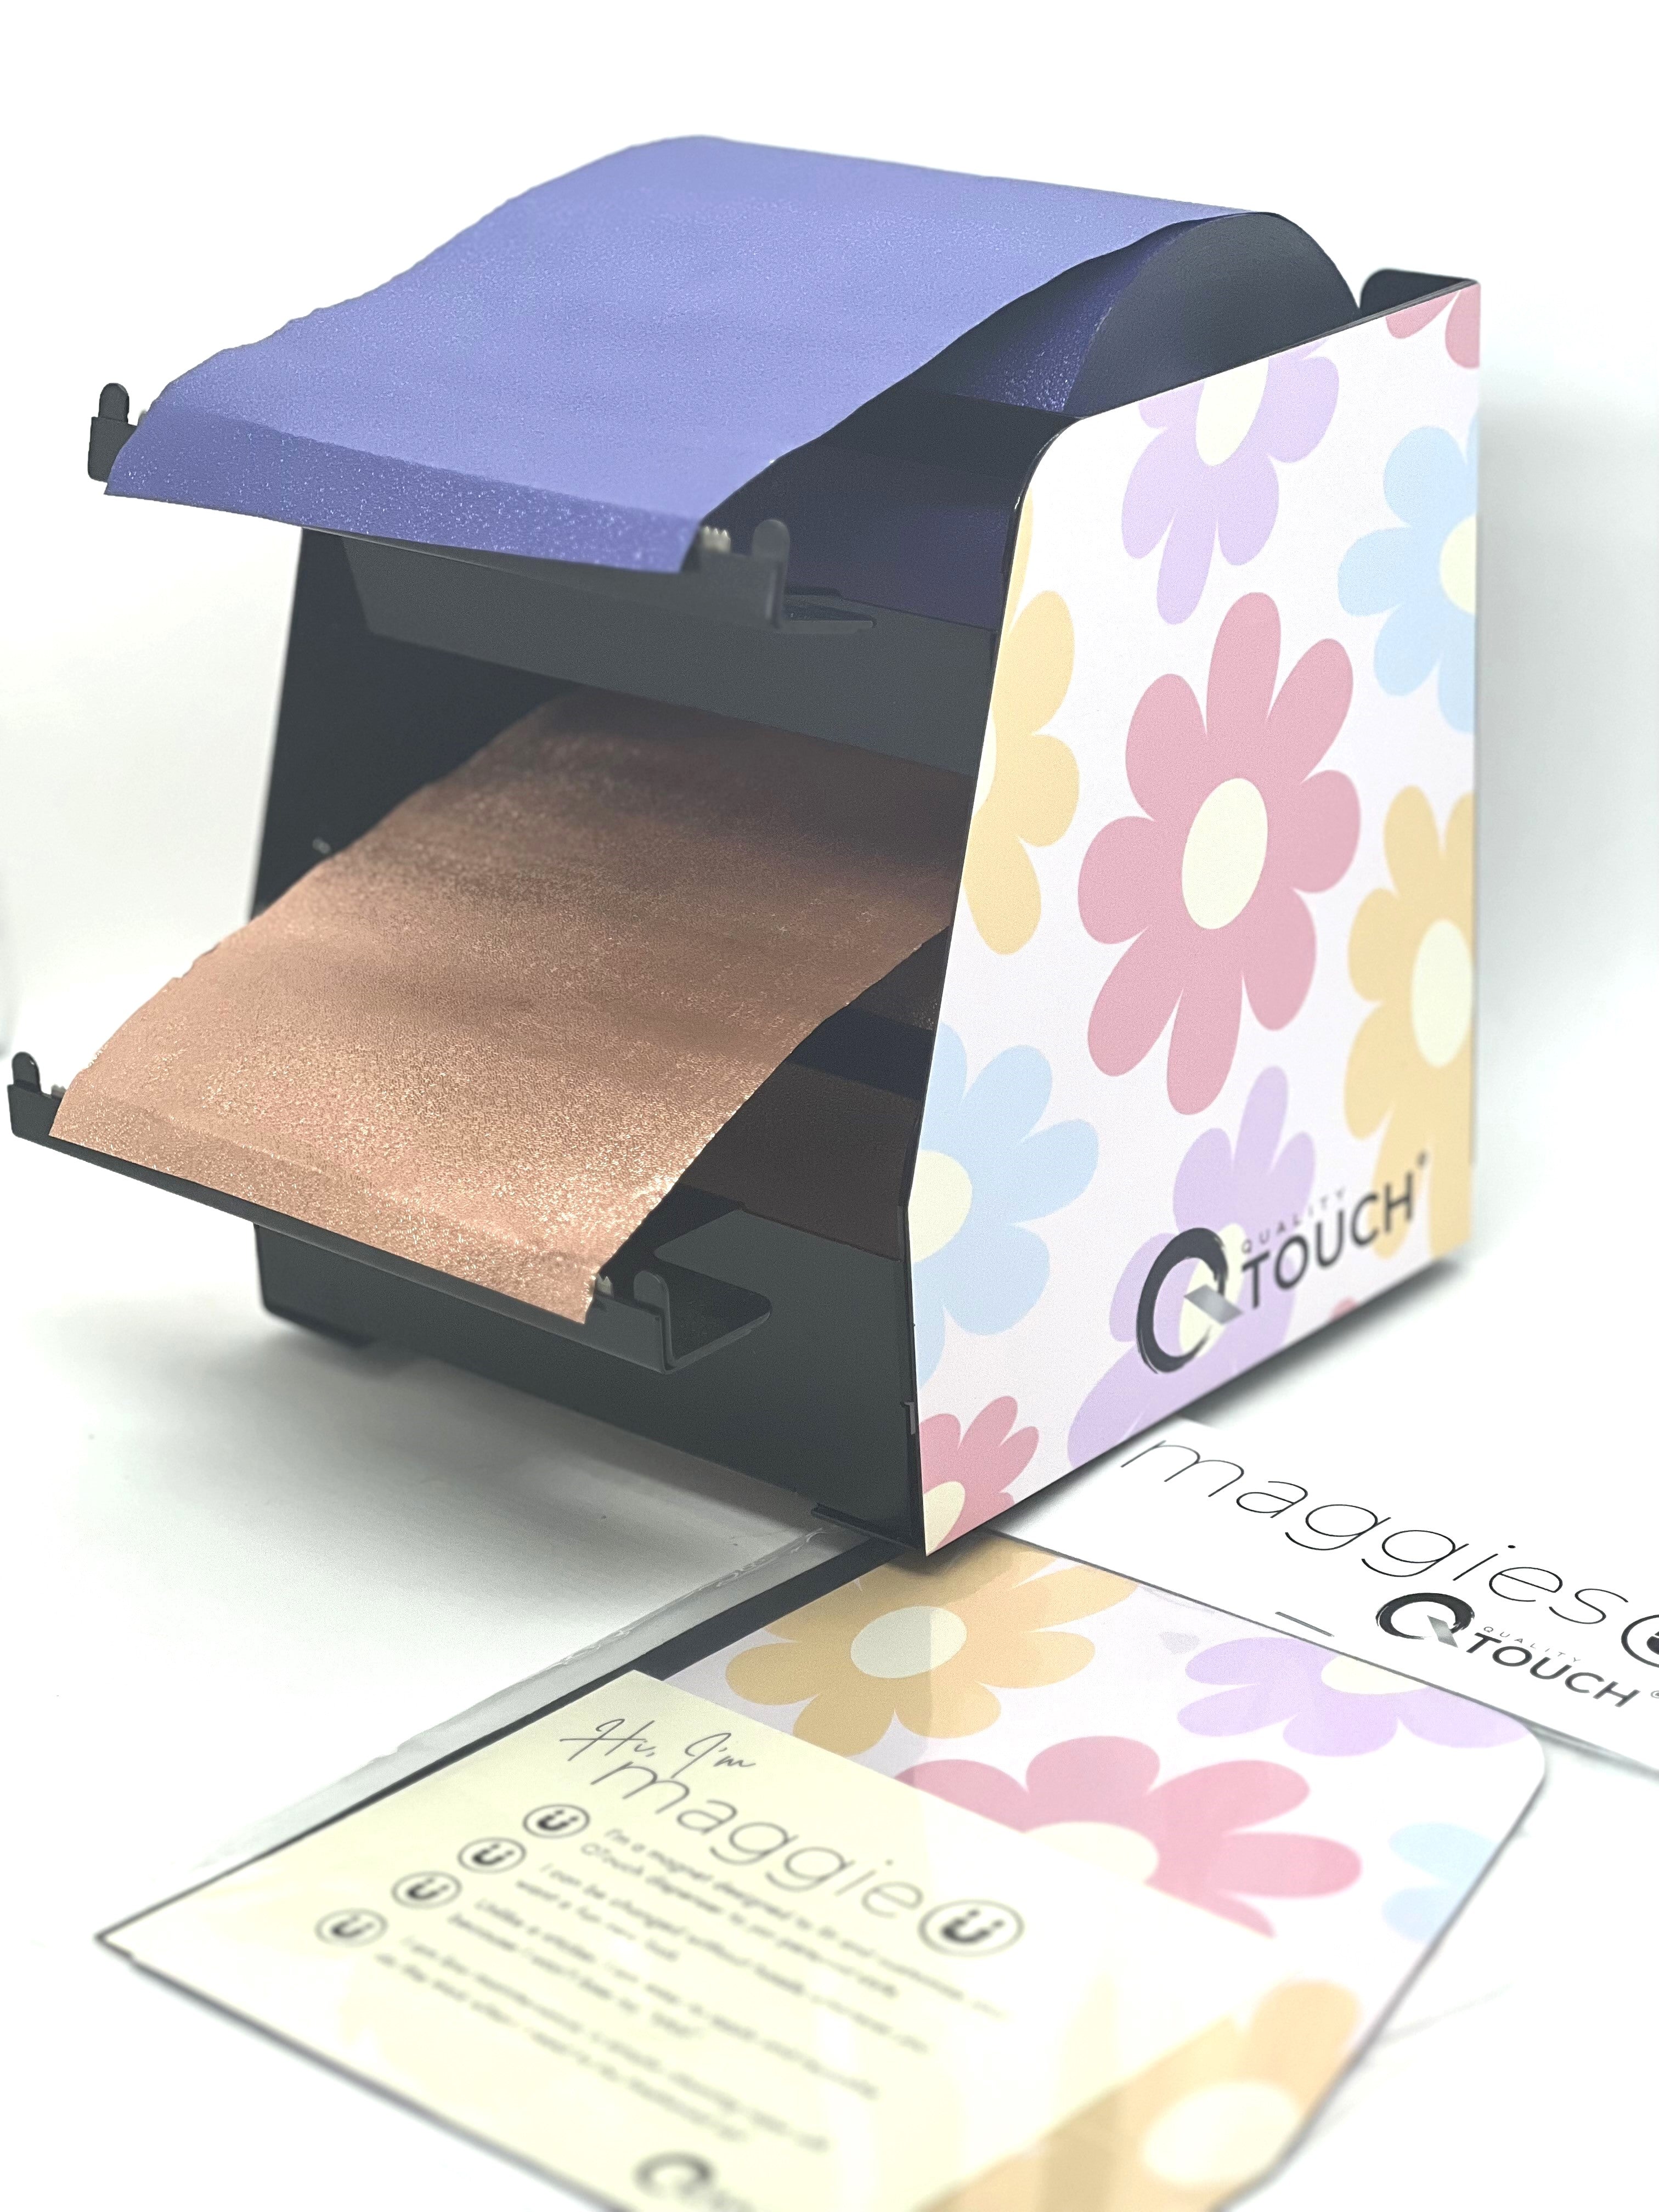 Quality Touch Foil Cutting Machine featuring the Flower Power Maggie